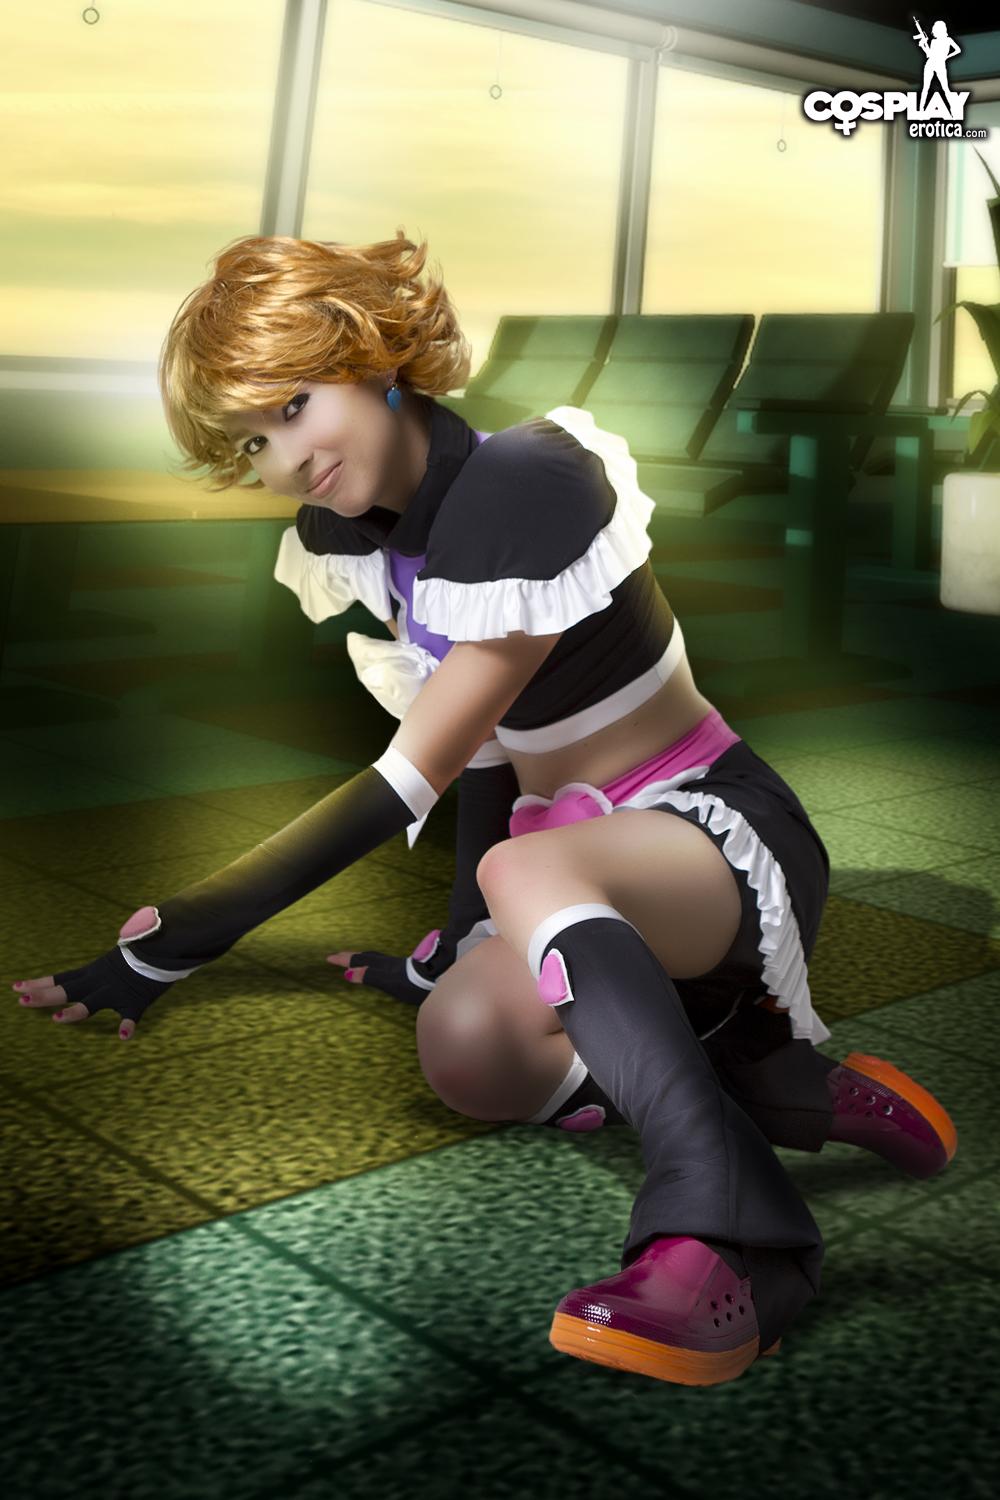 Cosplay hottie stacy strisce in un set anime sexy
 #60007694